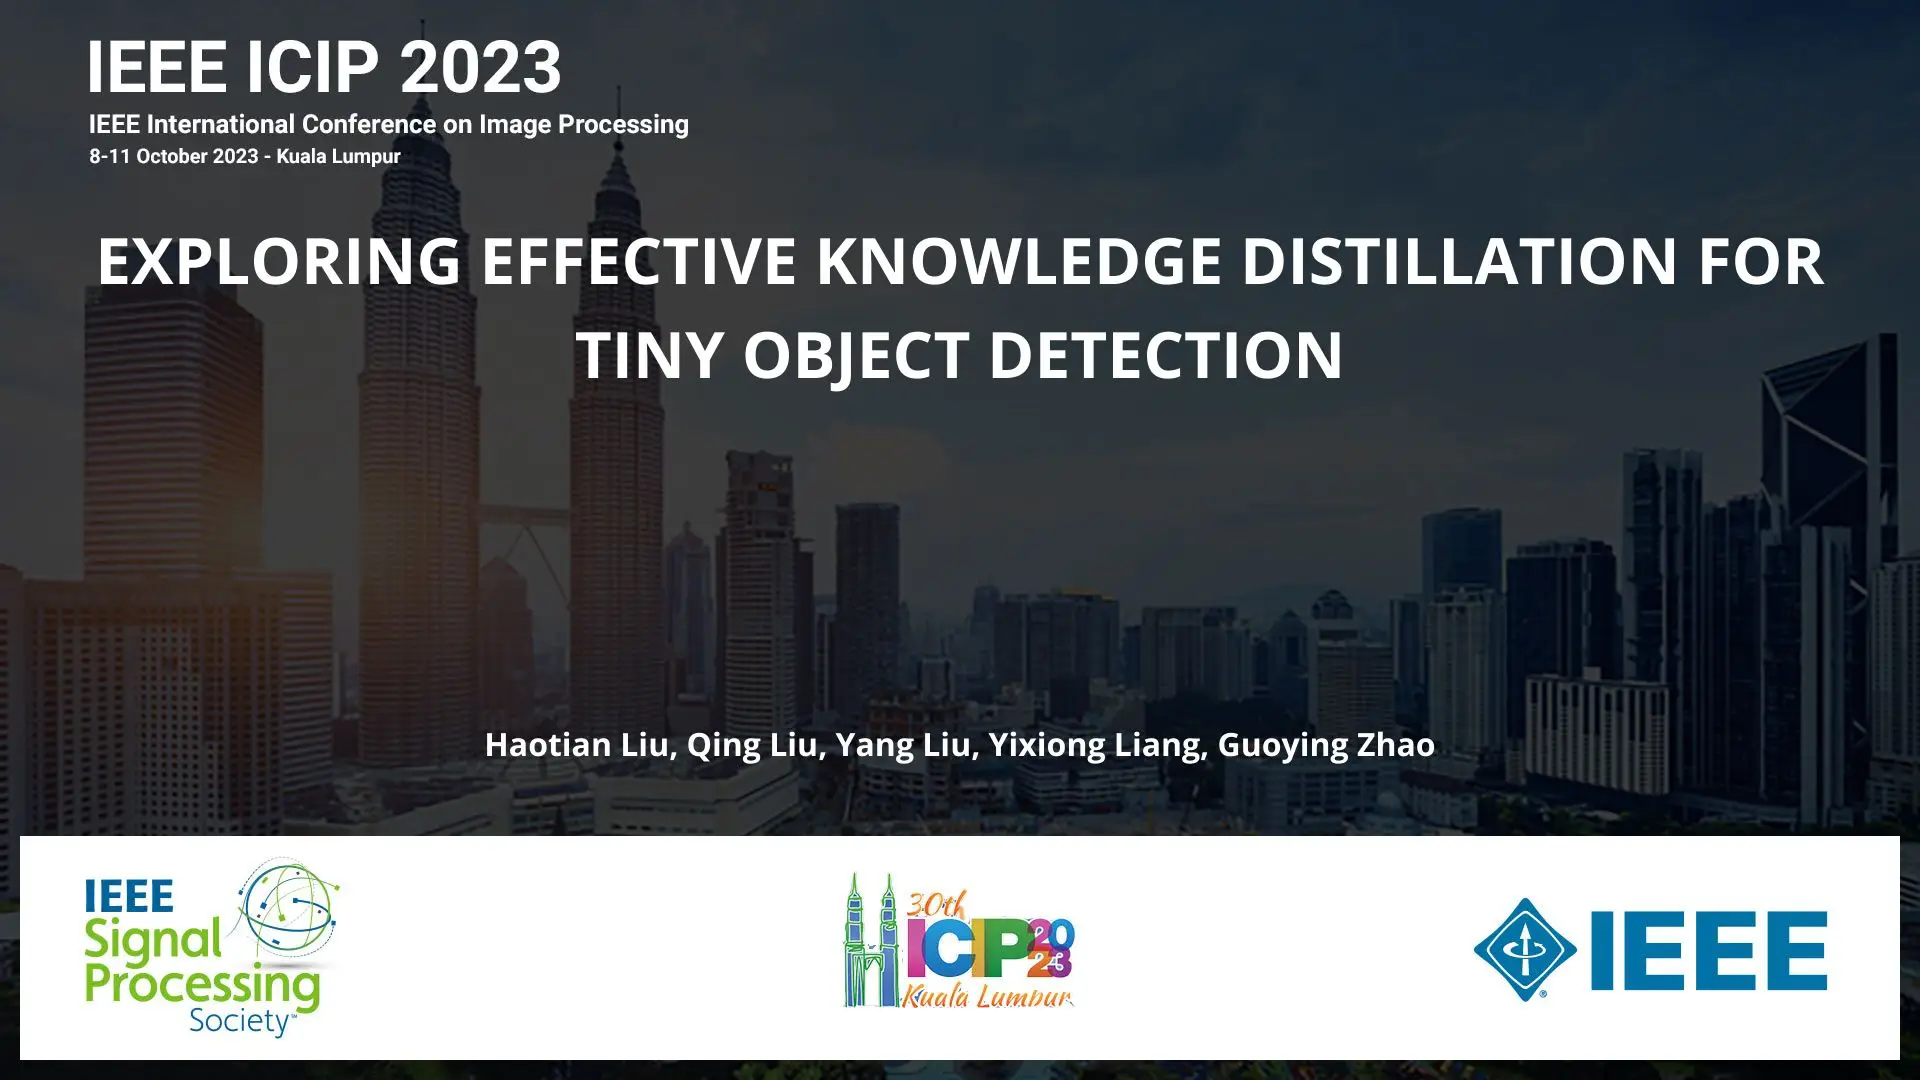 EXPLORING EFFECTIVE KNOWLEDGE DISTILLATION FOR TINY OBJECT DETECTION